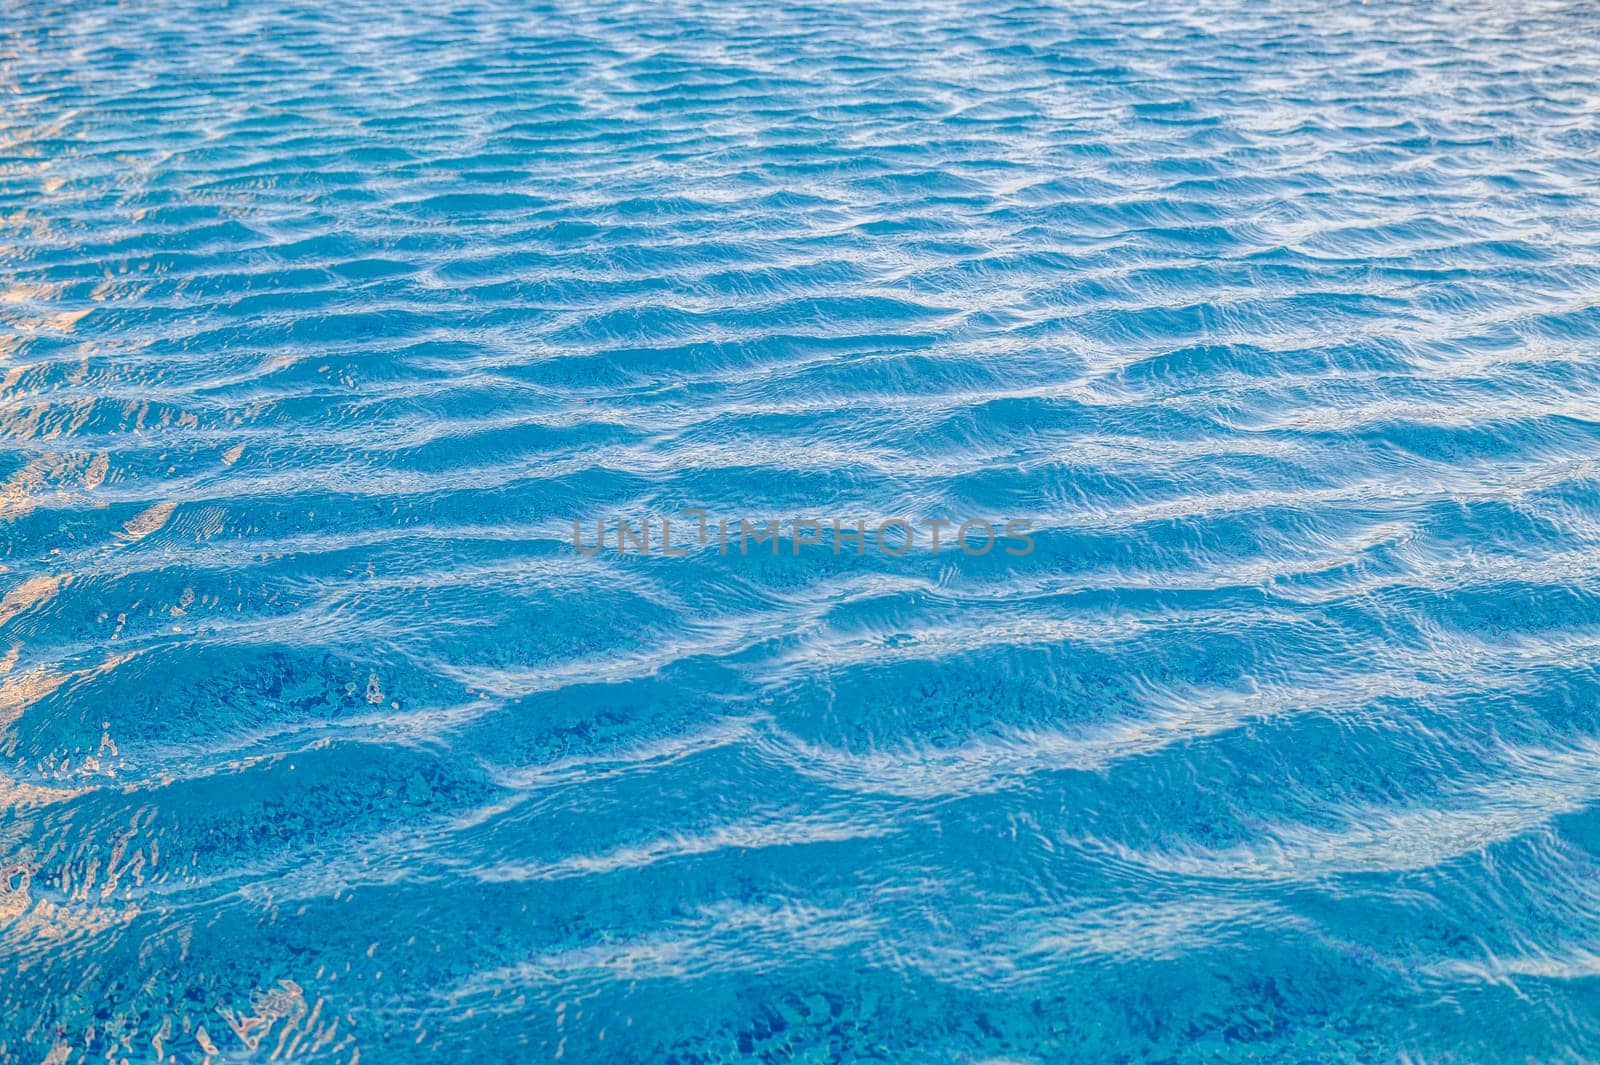 Blue ripped sea water as swimming pool.1 by Mixa74